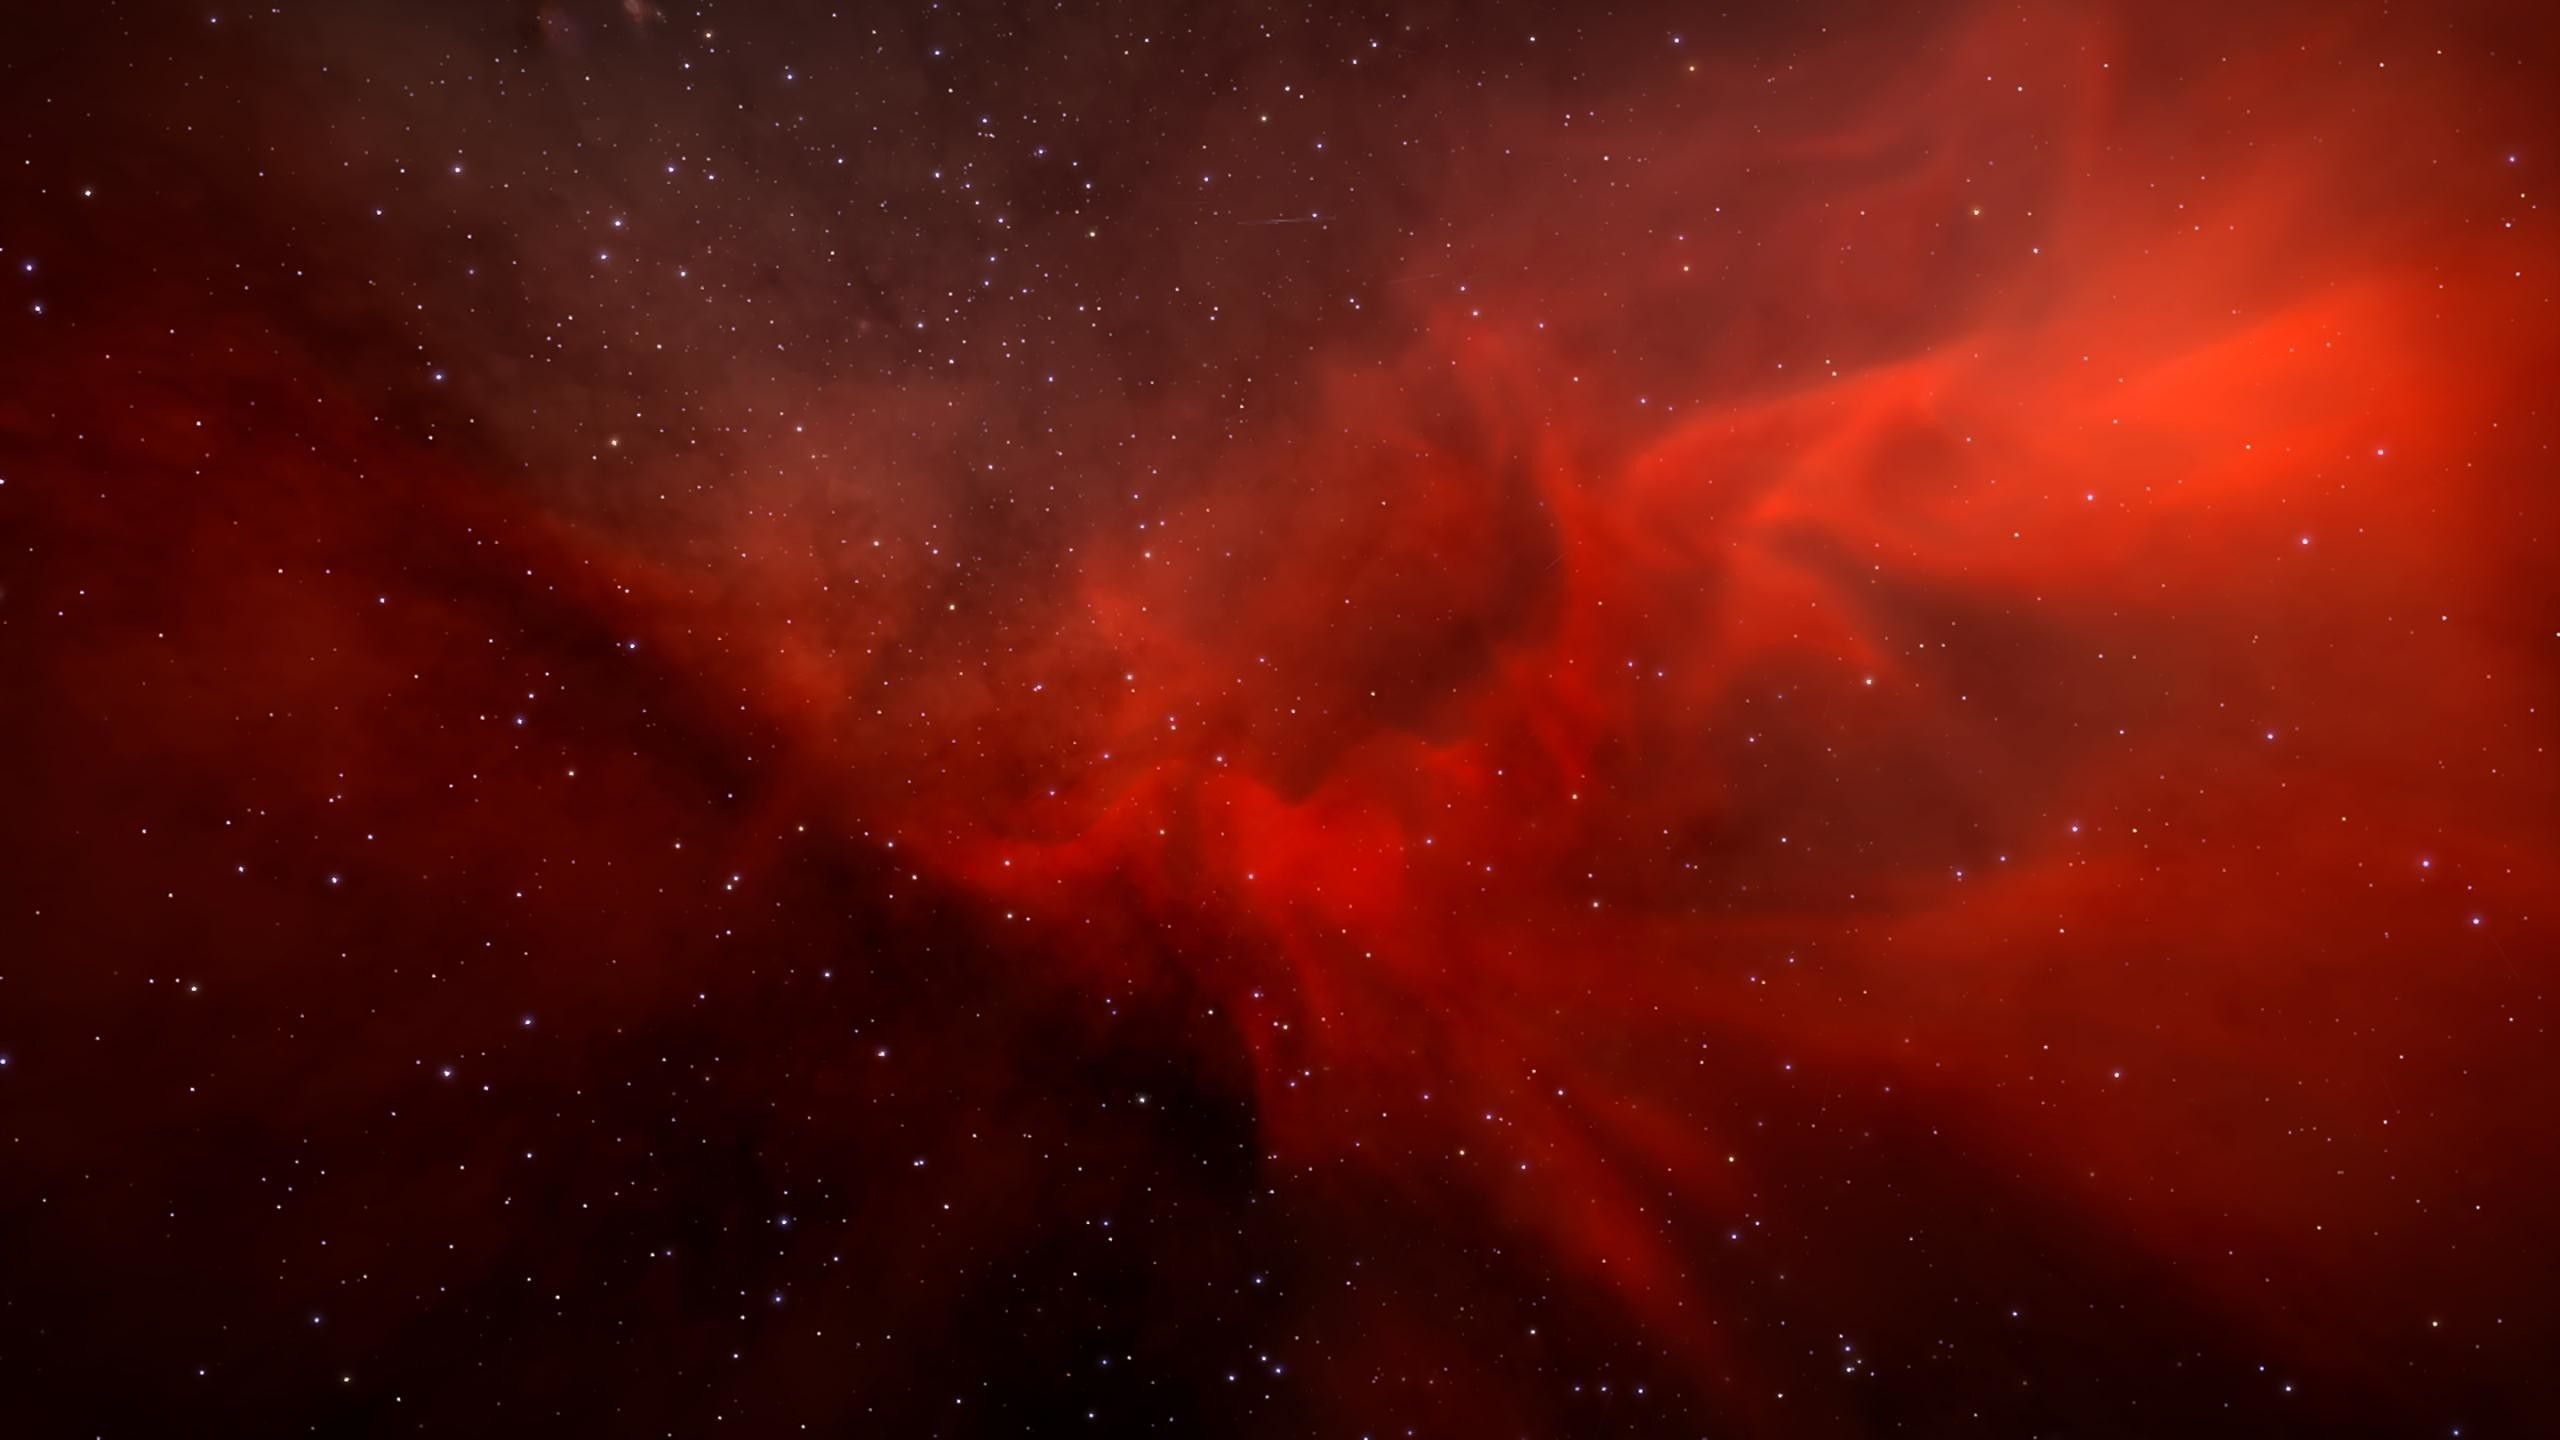 A deep space image with a red nebula and stars - 2560x1440